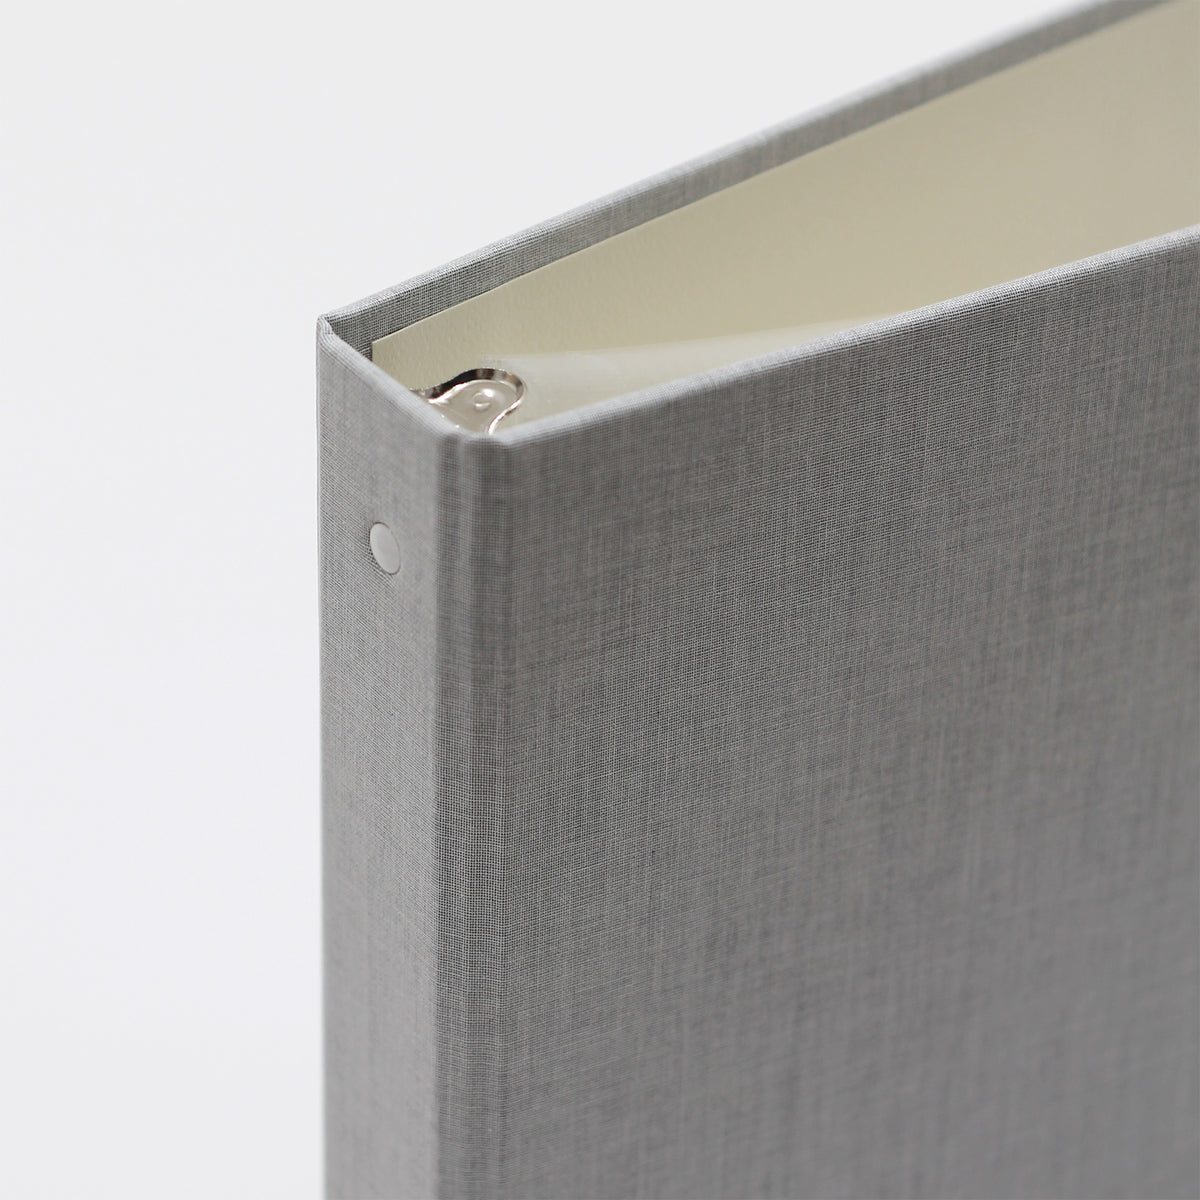 Photo Binder for 5x7 photos | Cover: Dove Gray Linen | Available Personalized